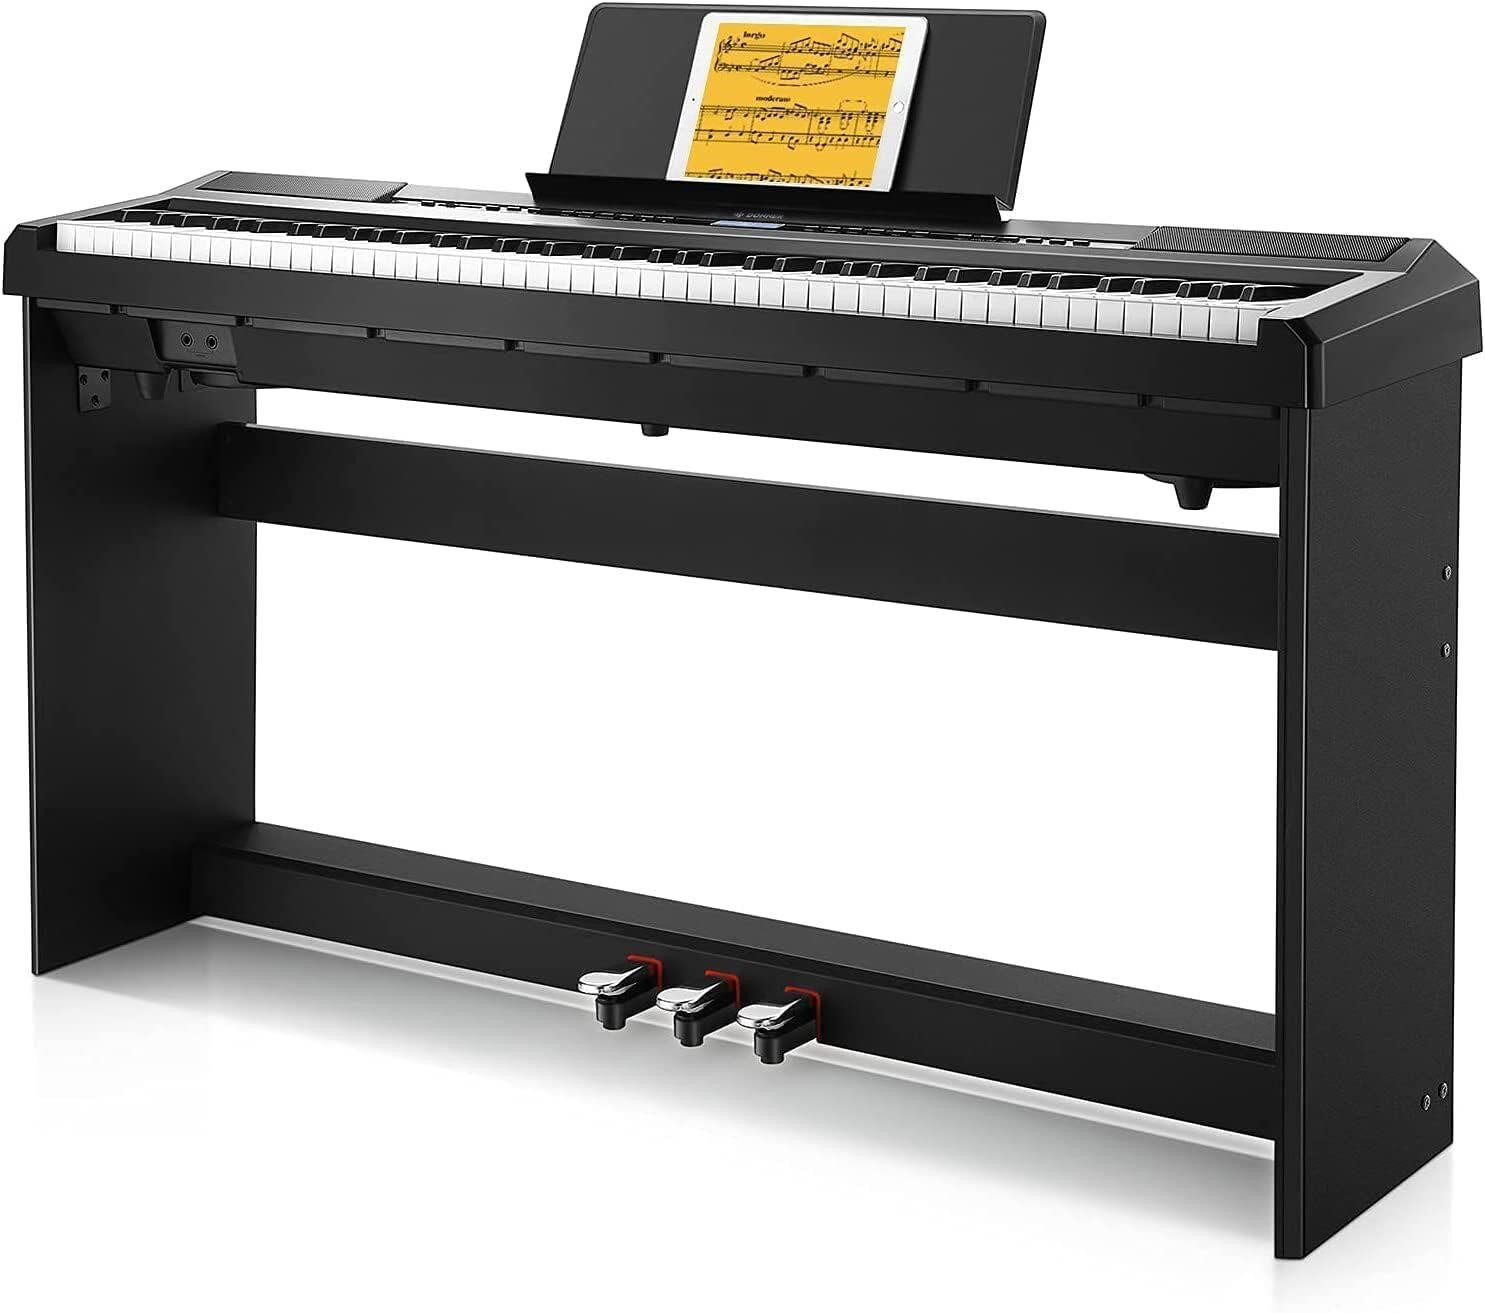 Donner DEP-20 88 Key Digital Piano with Stand